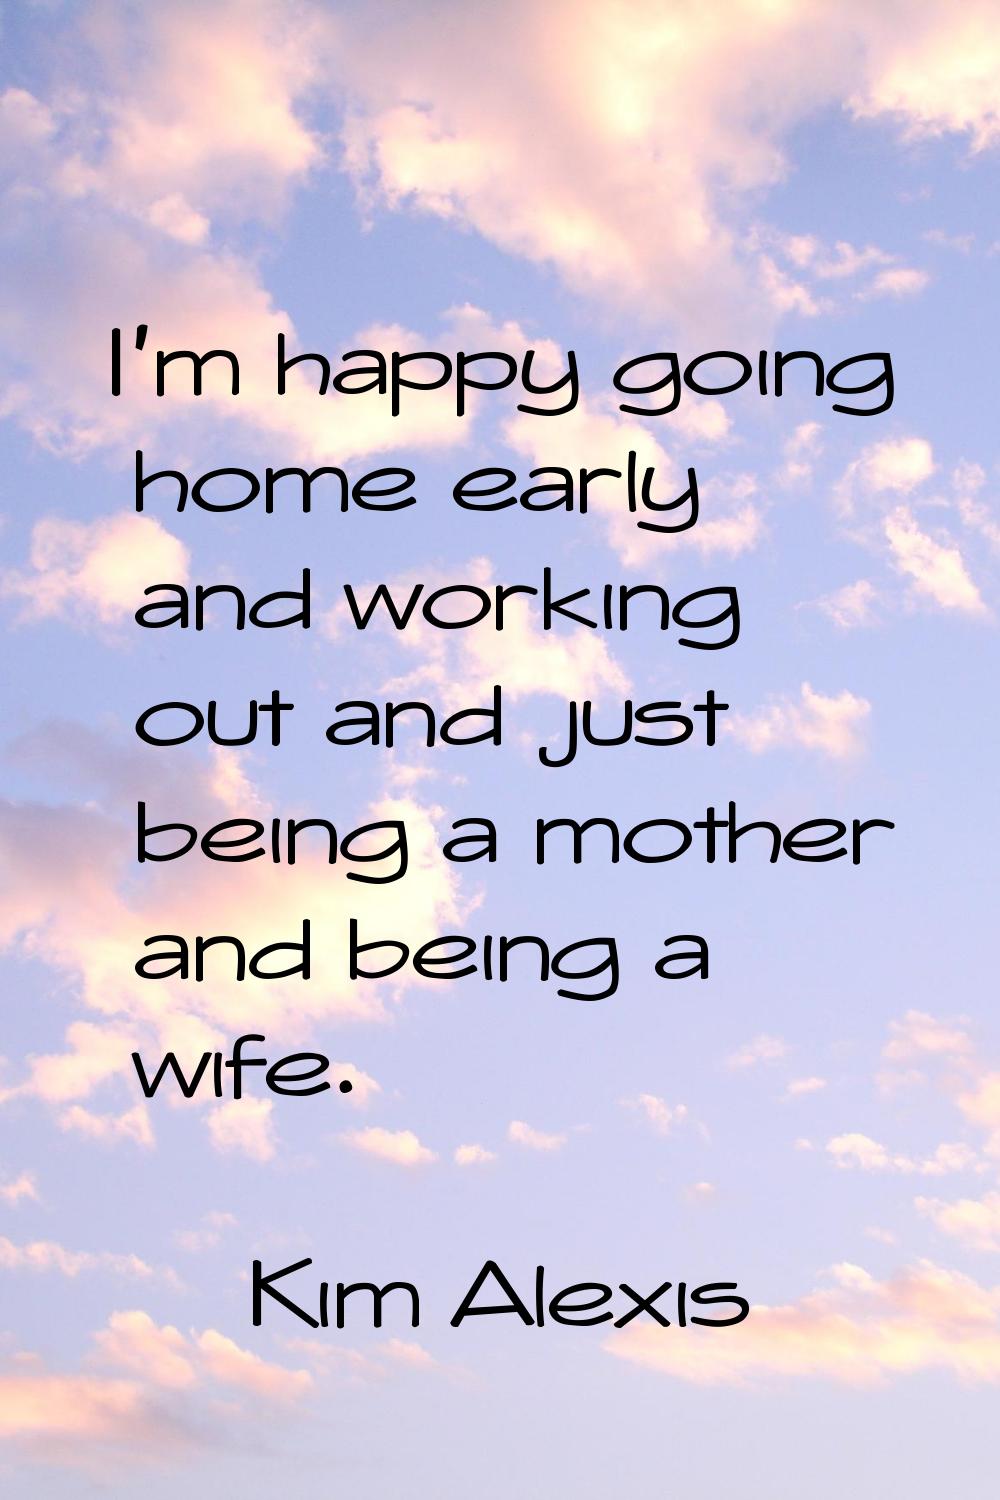 I'm happy going home early and working out and just being a mother and being a wife.